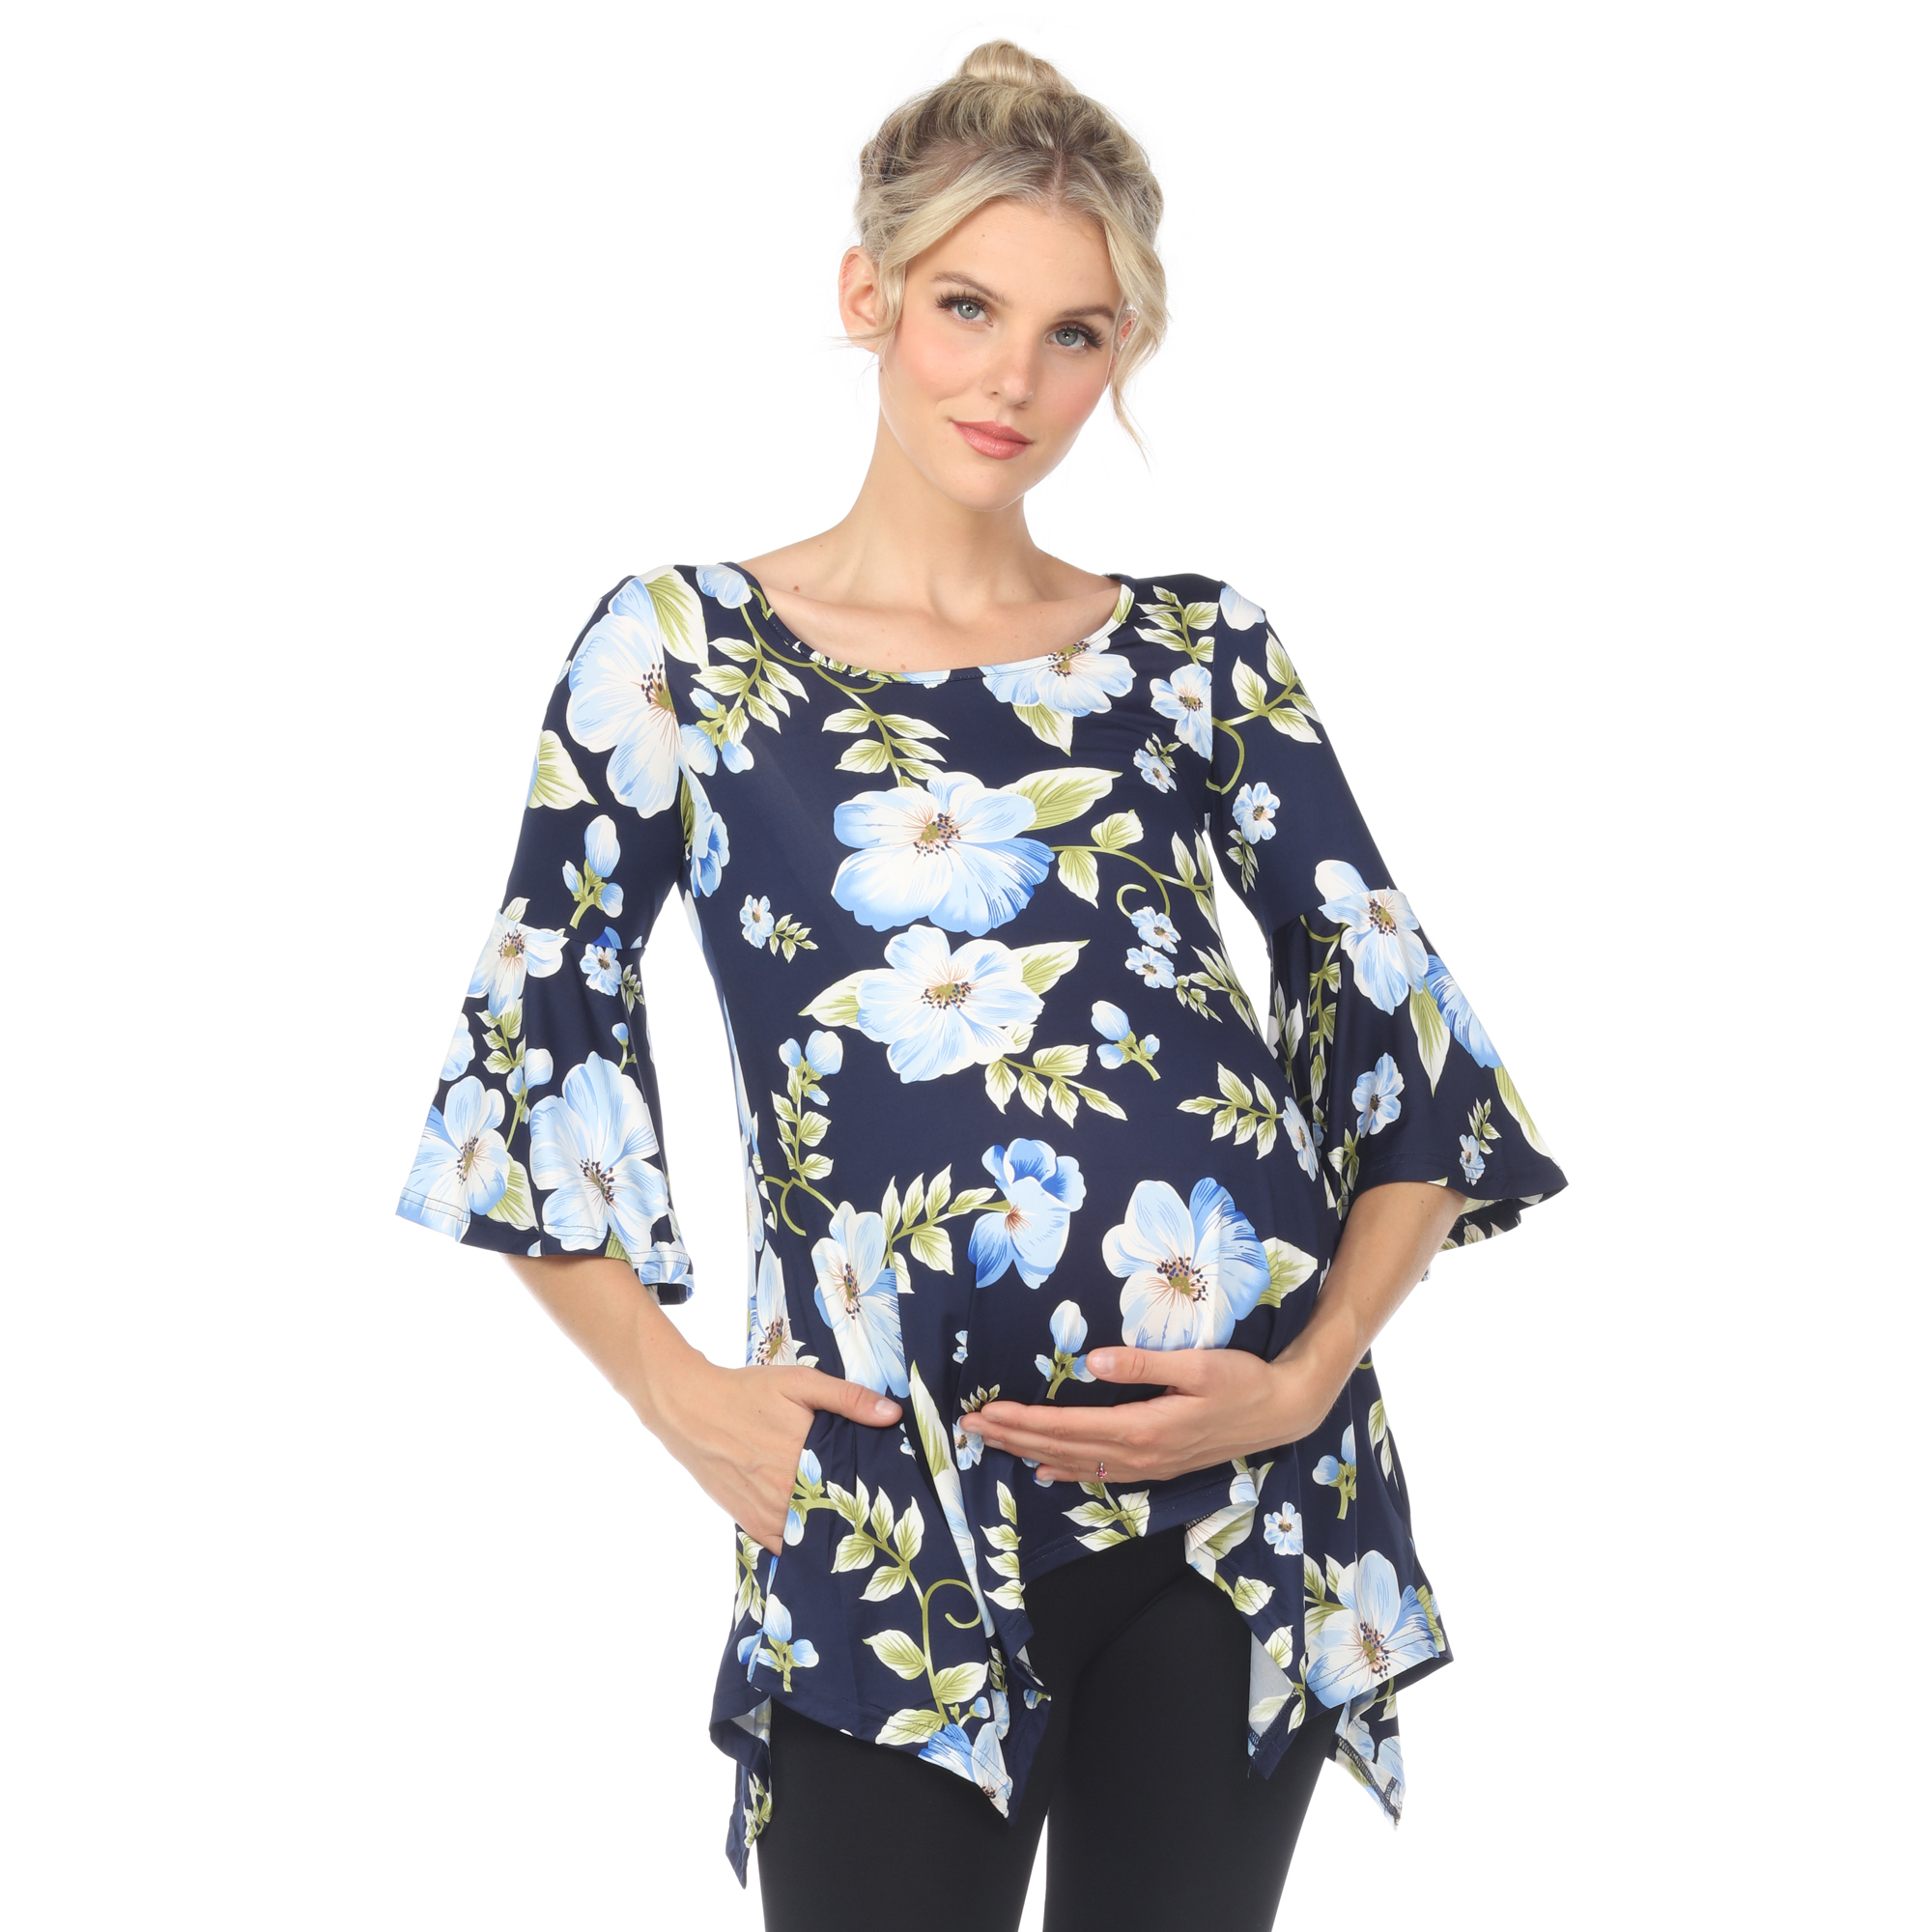 White Mark Women's Maternity Floral Print Quarter Sleeve Tunic Top With Pockets - Blue Flower, 3X